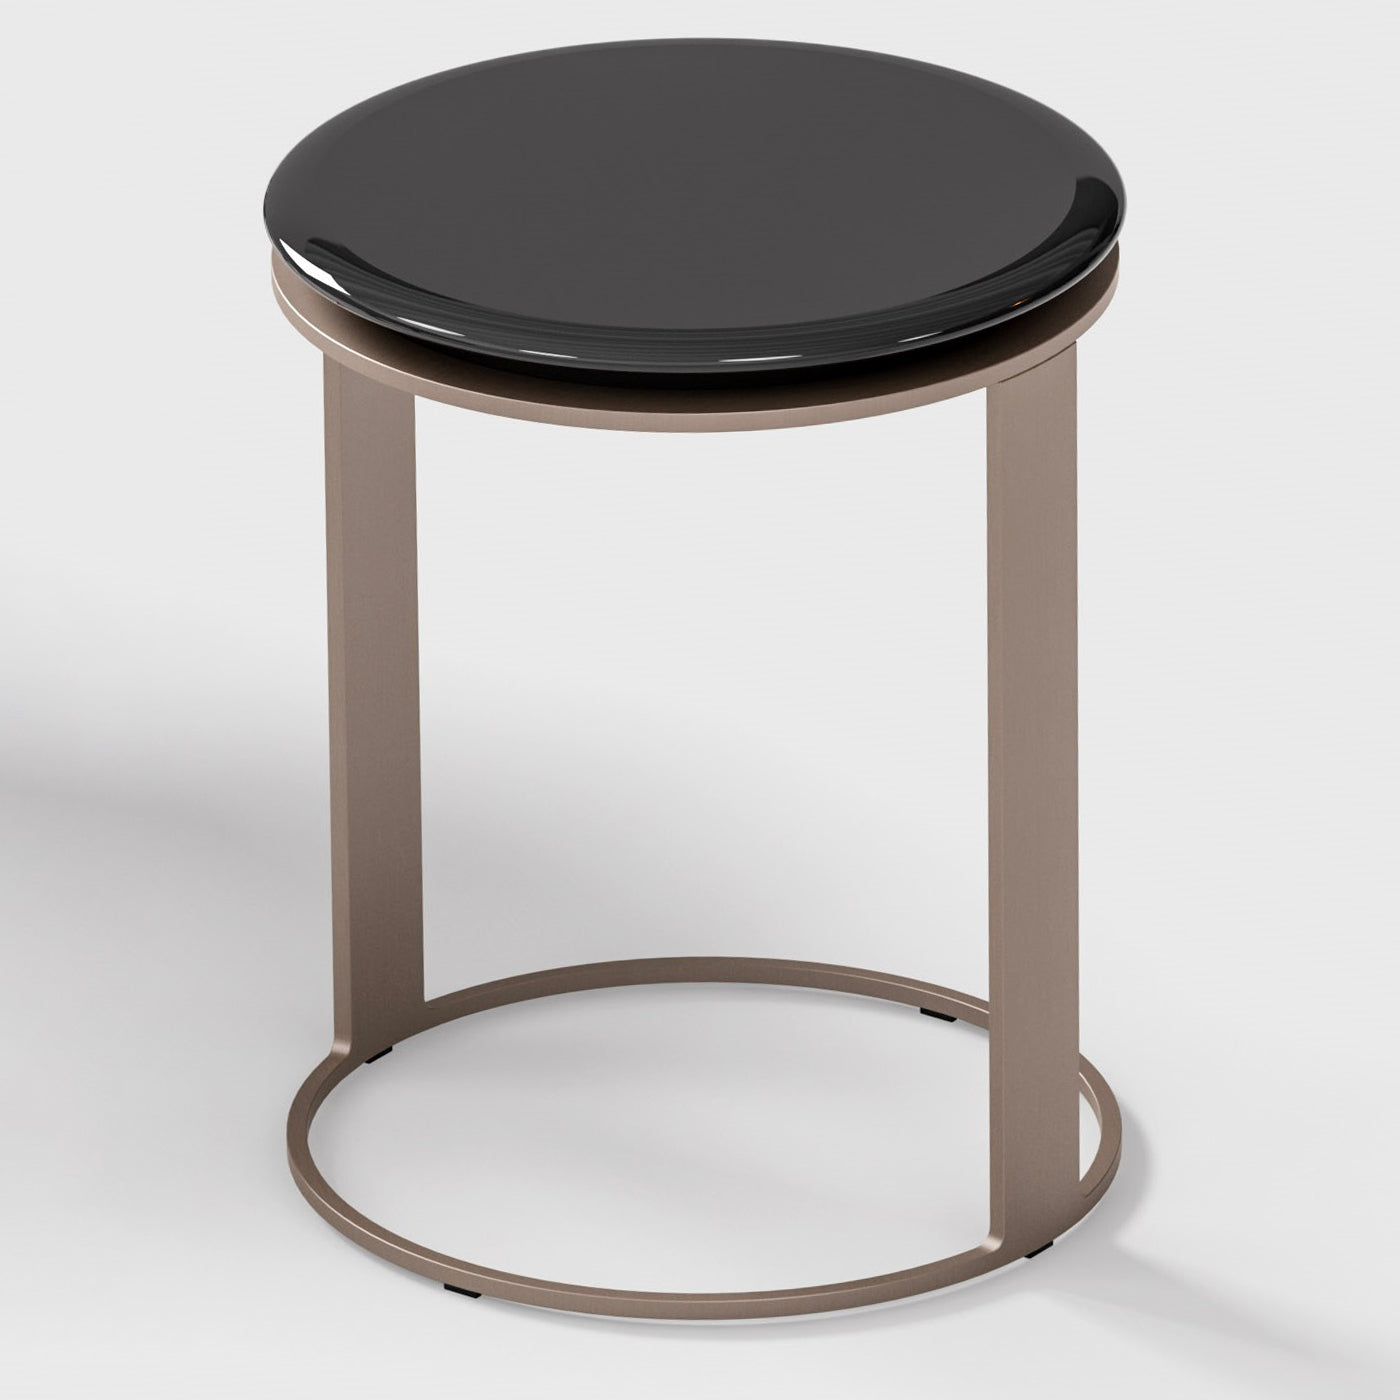 Glossy Lacquered Black Side Table - Alternative view 1